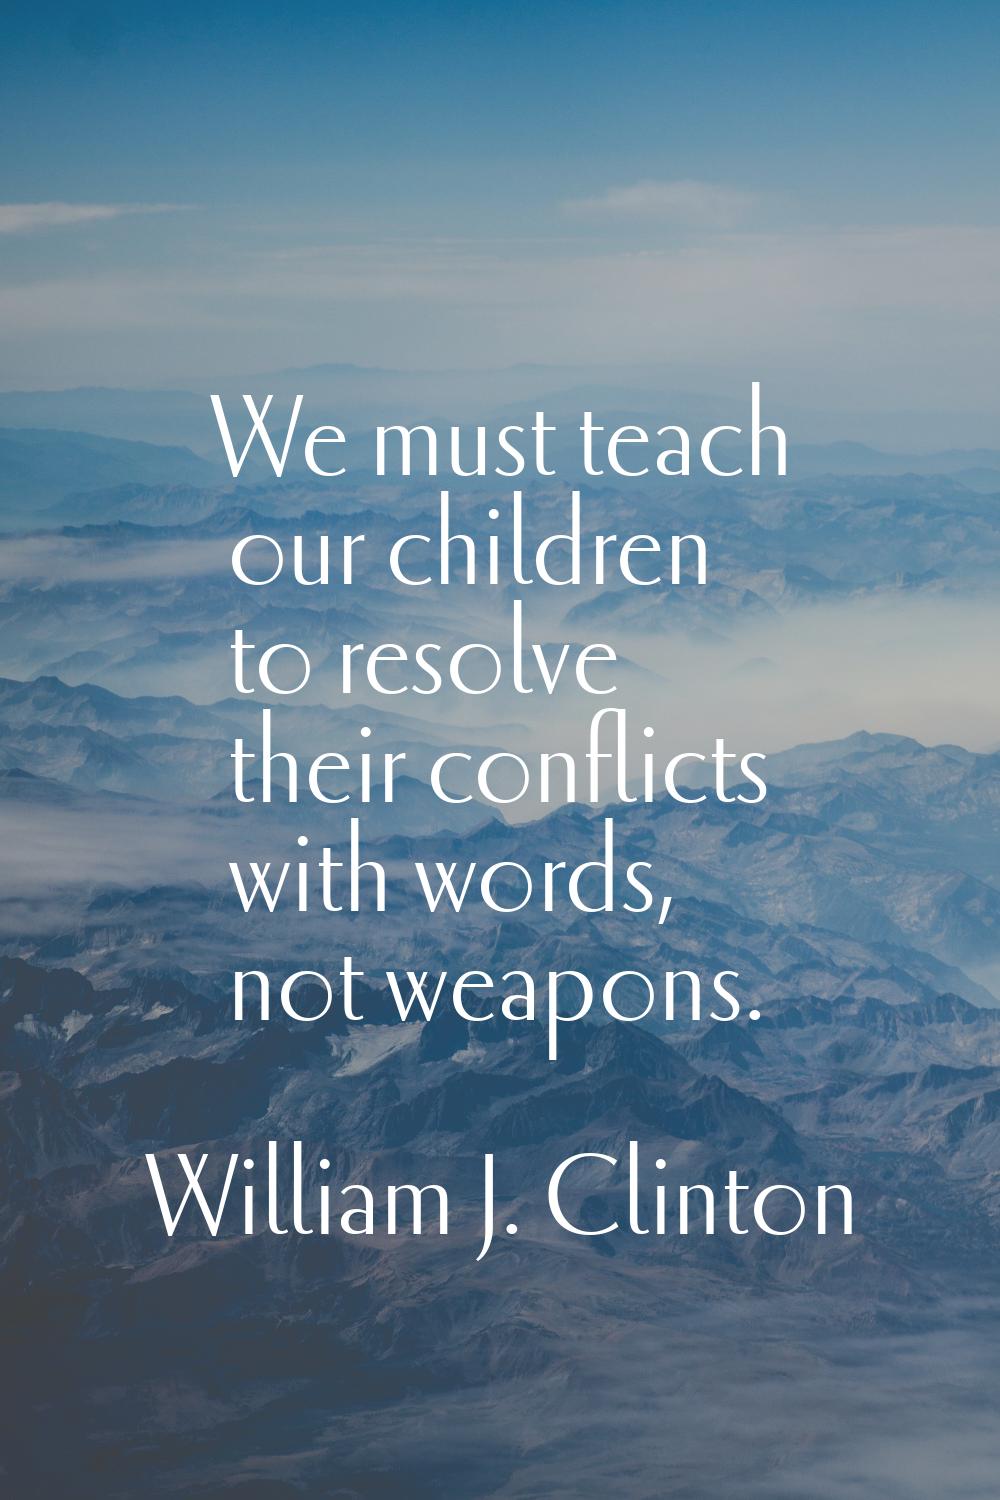 We must teach our children to resolve their conflicts with words, not weapons.